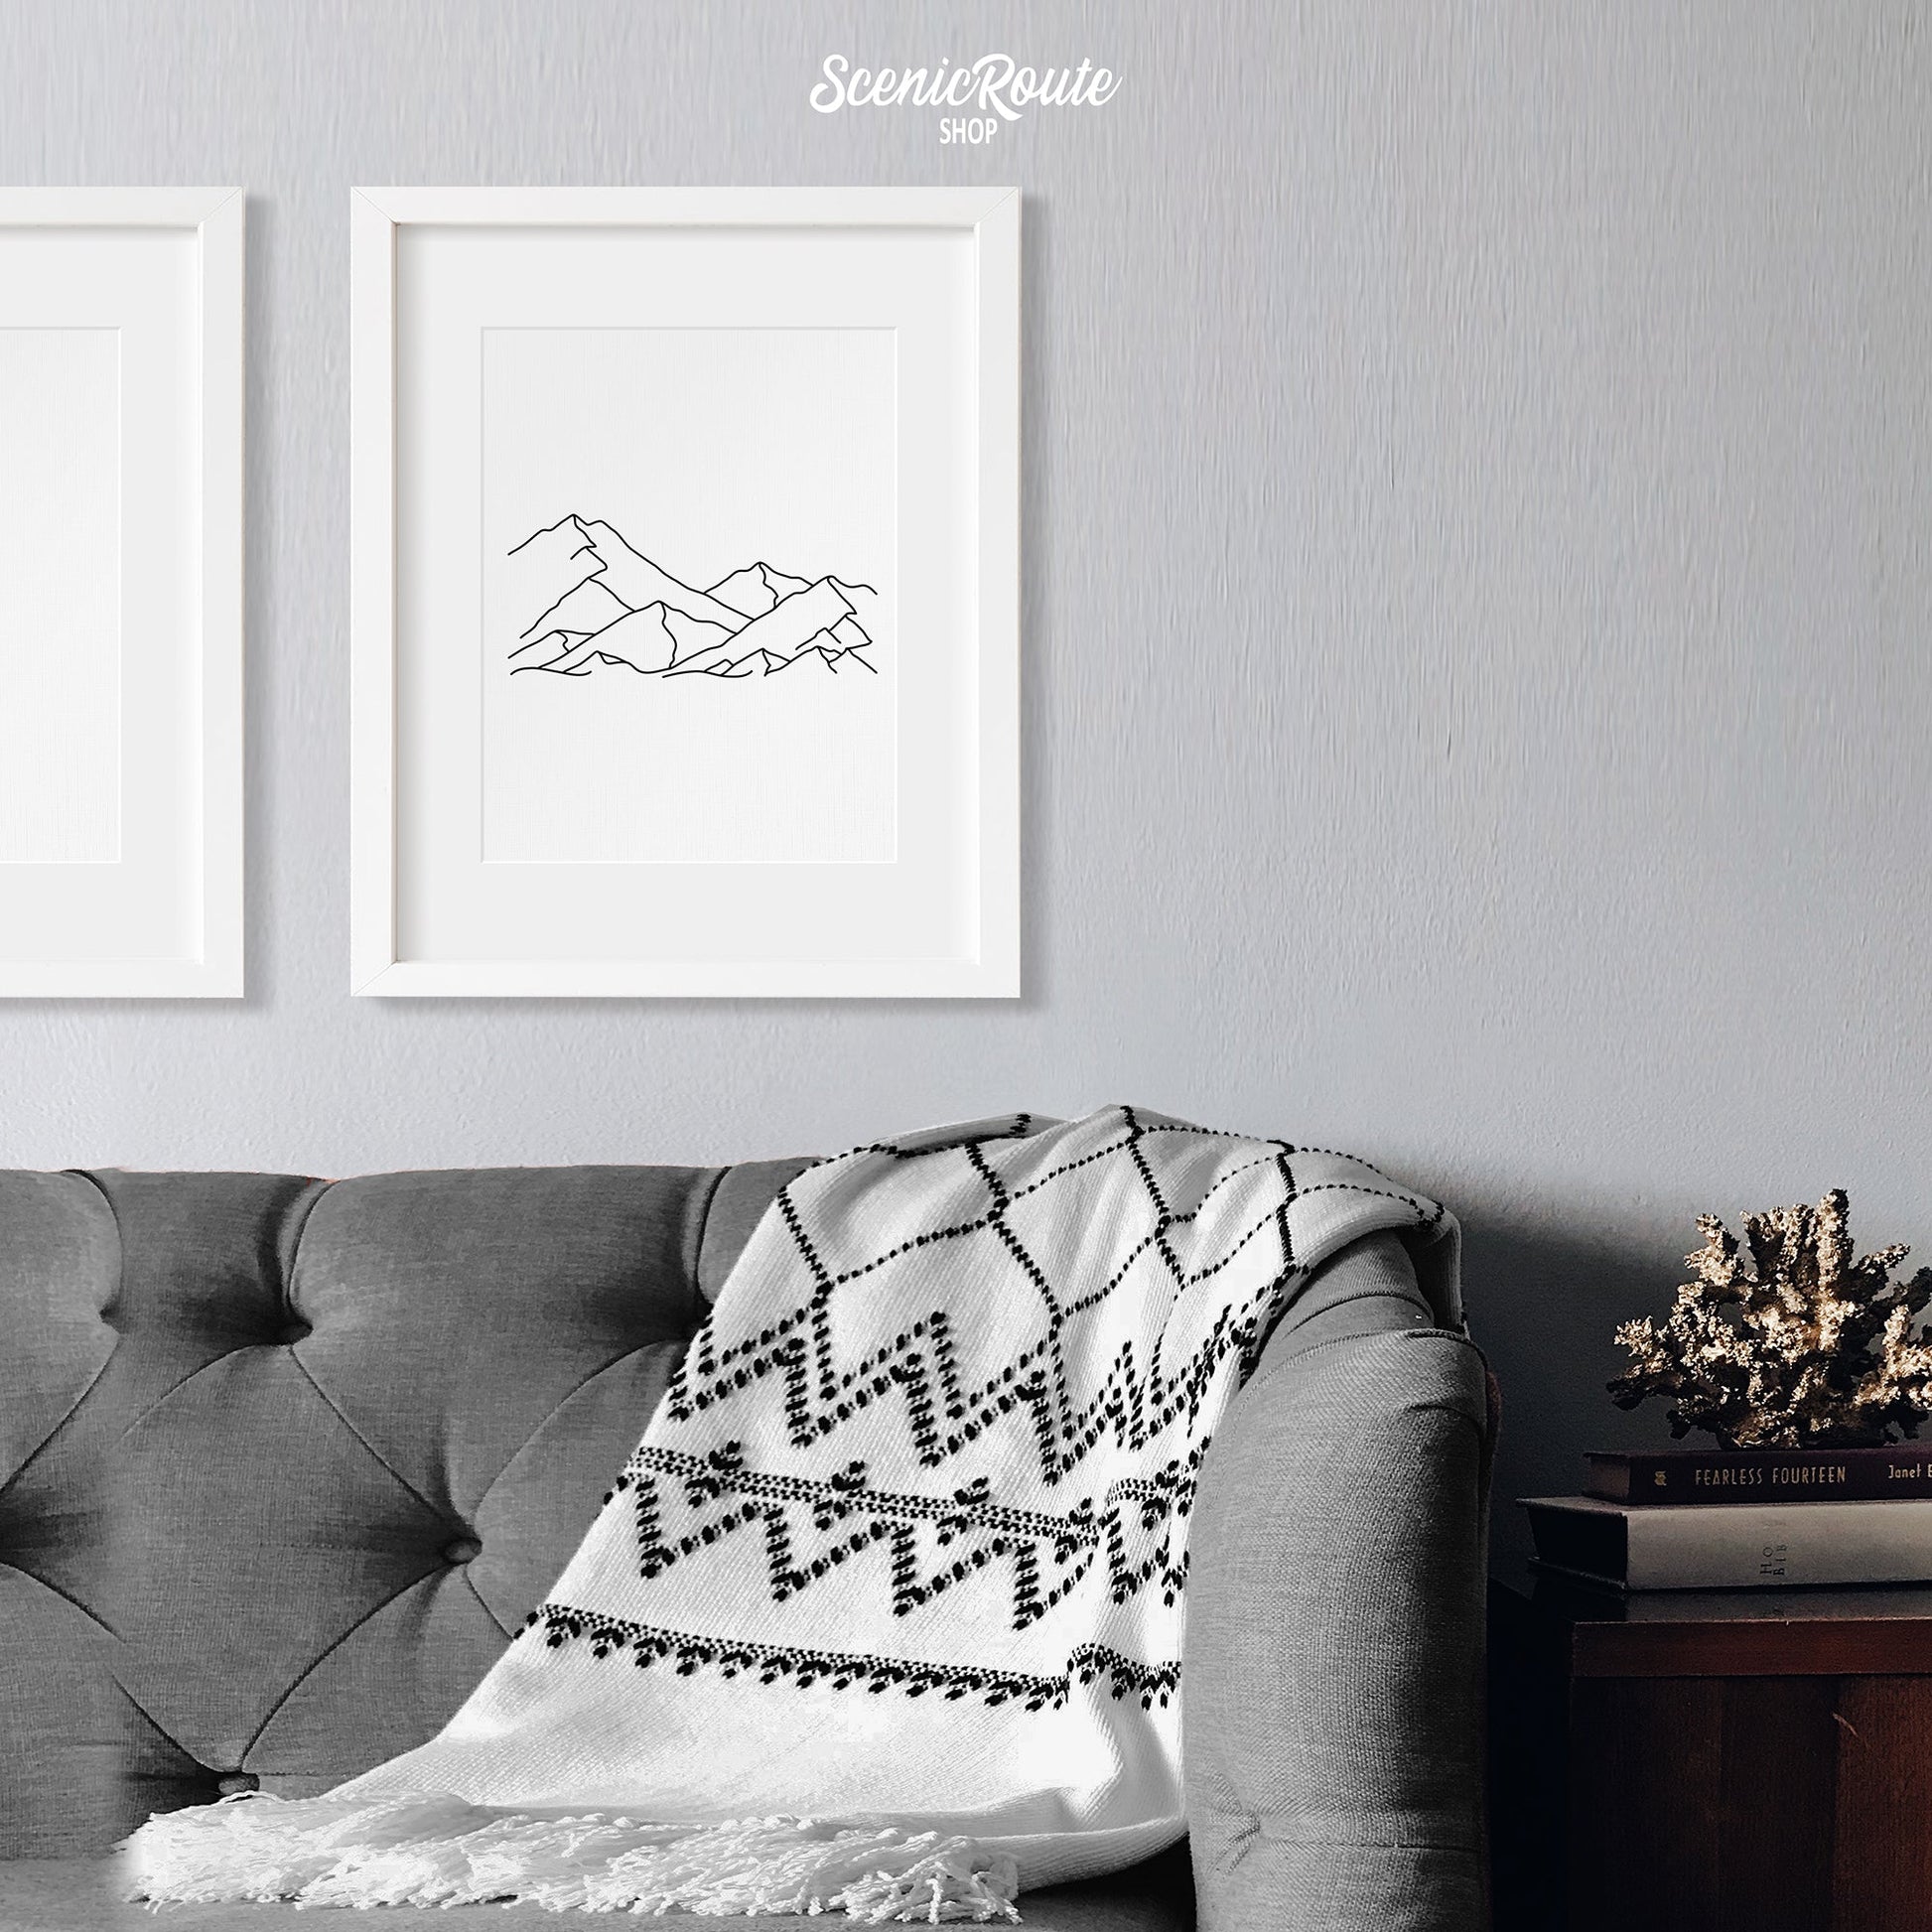 A framed line art drawing of A Mountain Range on a white wall above a couch with a blanket